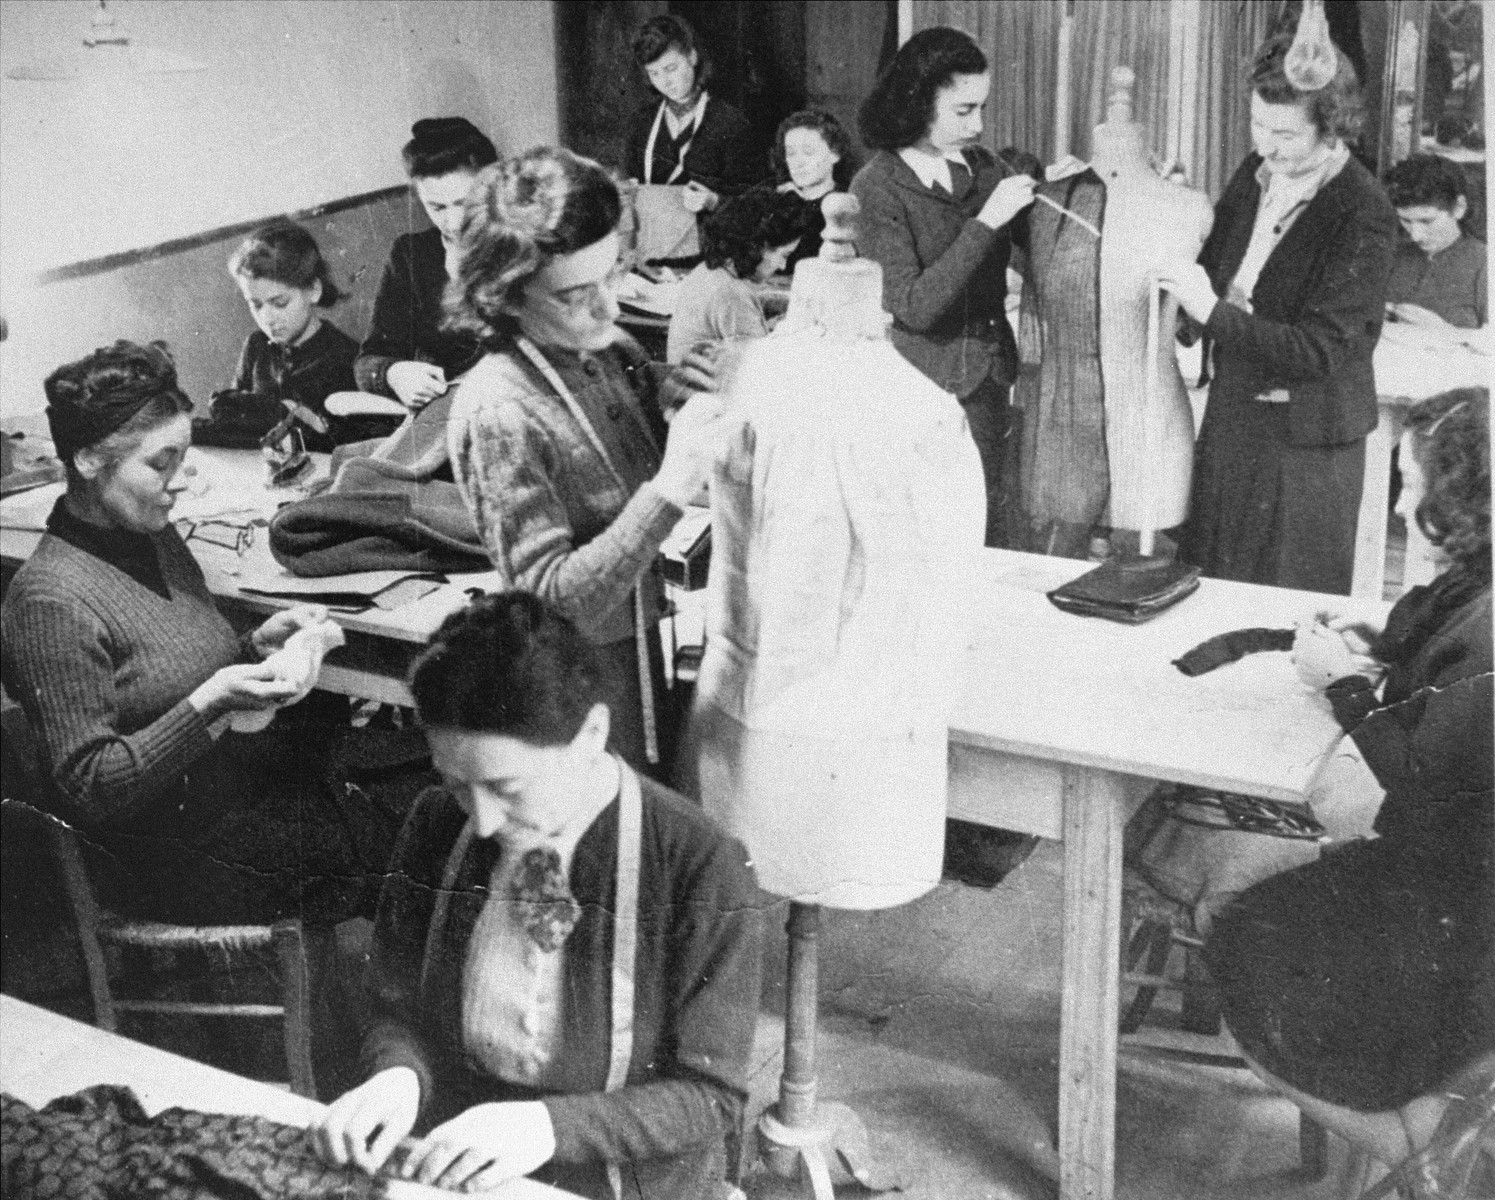 Women learn dressmaking at an ORT vocational school.  

Pictured seated in the upper right hand corner is  Hermine Katz